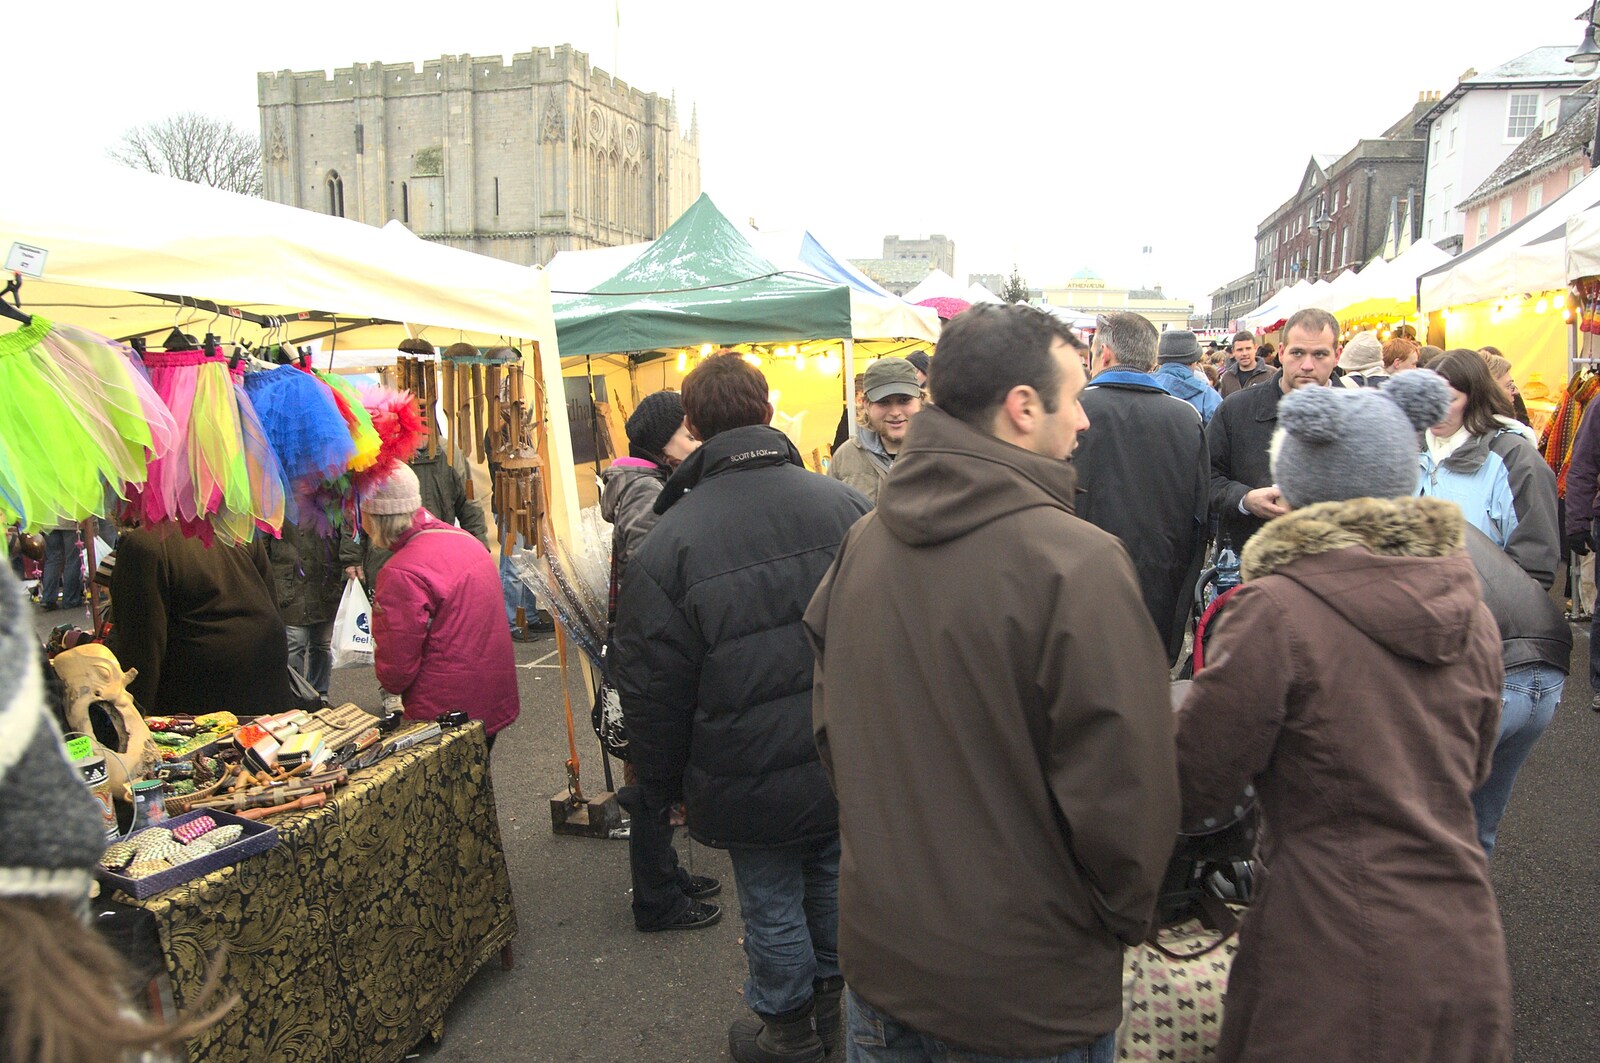 Market stalls and Abbey Gate from A Christmas Fair, Bury St. Edmunds, Suffolk - 28th November 2010